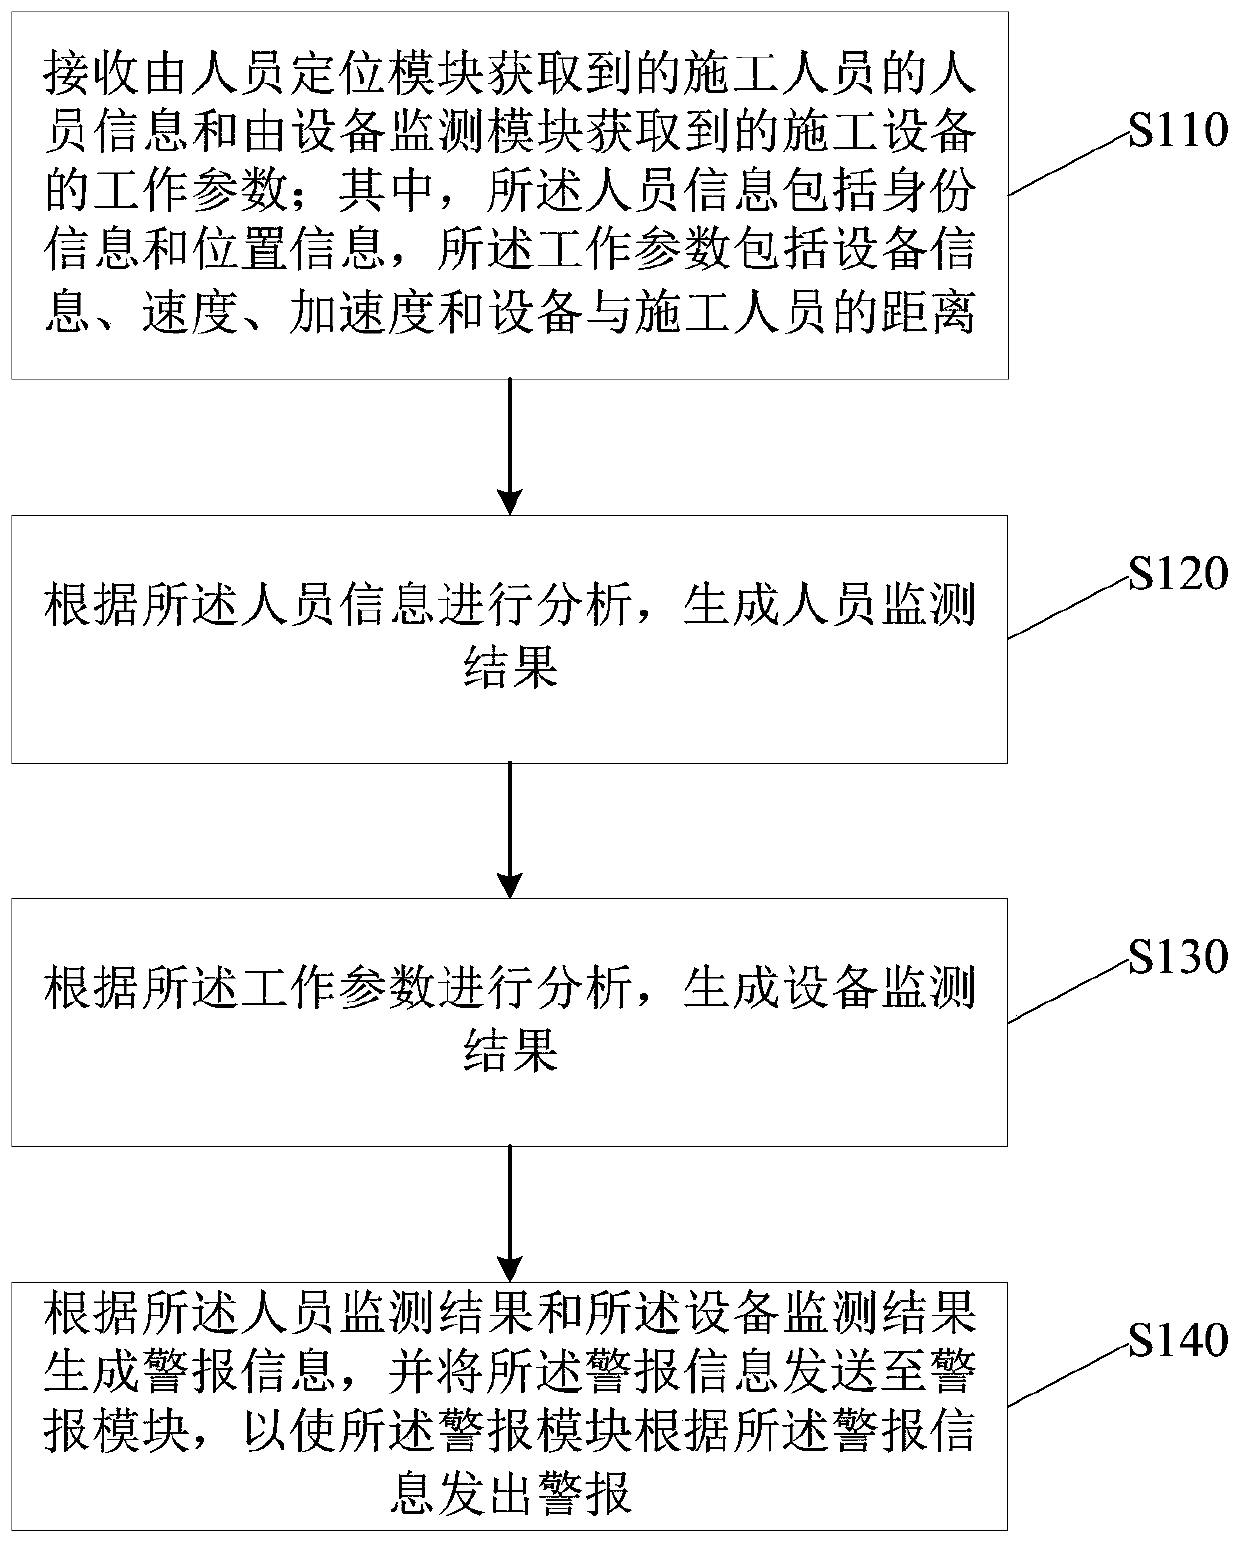 Tunnel monitoring system and tunnel monitoring method